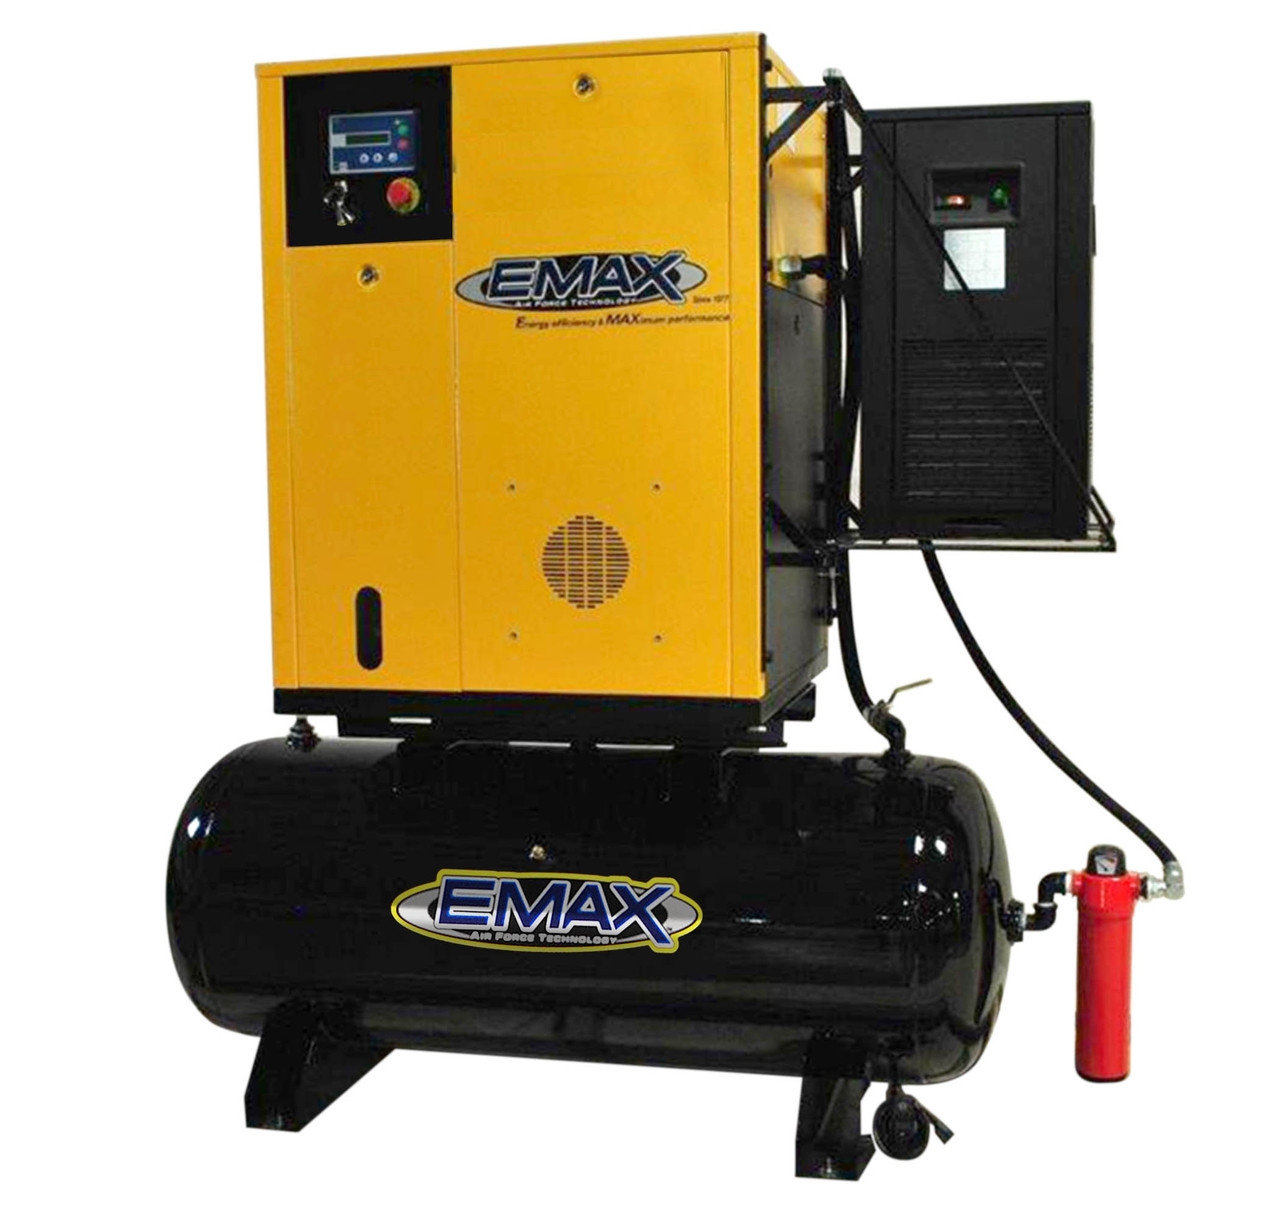 Emax ERSK150003 460 Volt 15 HP Three Phase Rotary Screw Air Compressor with Dryer